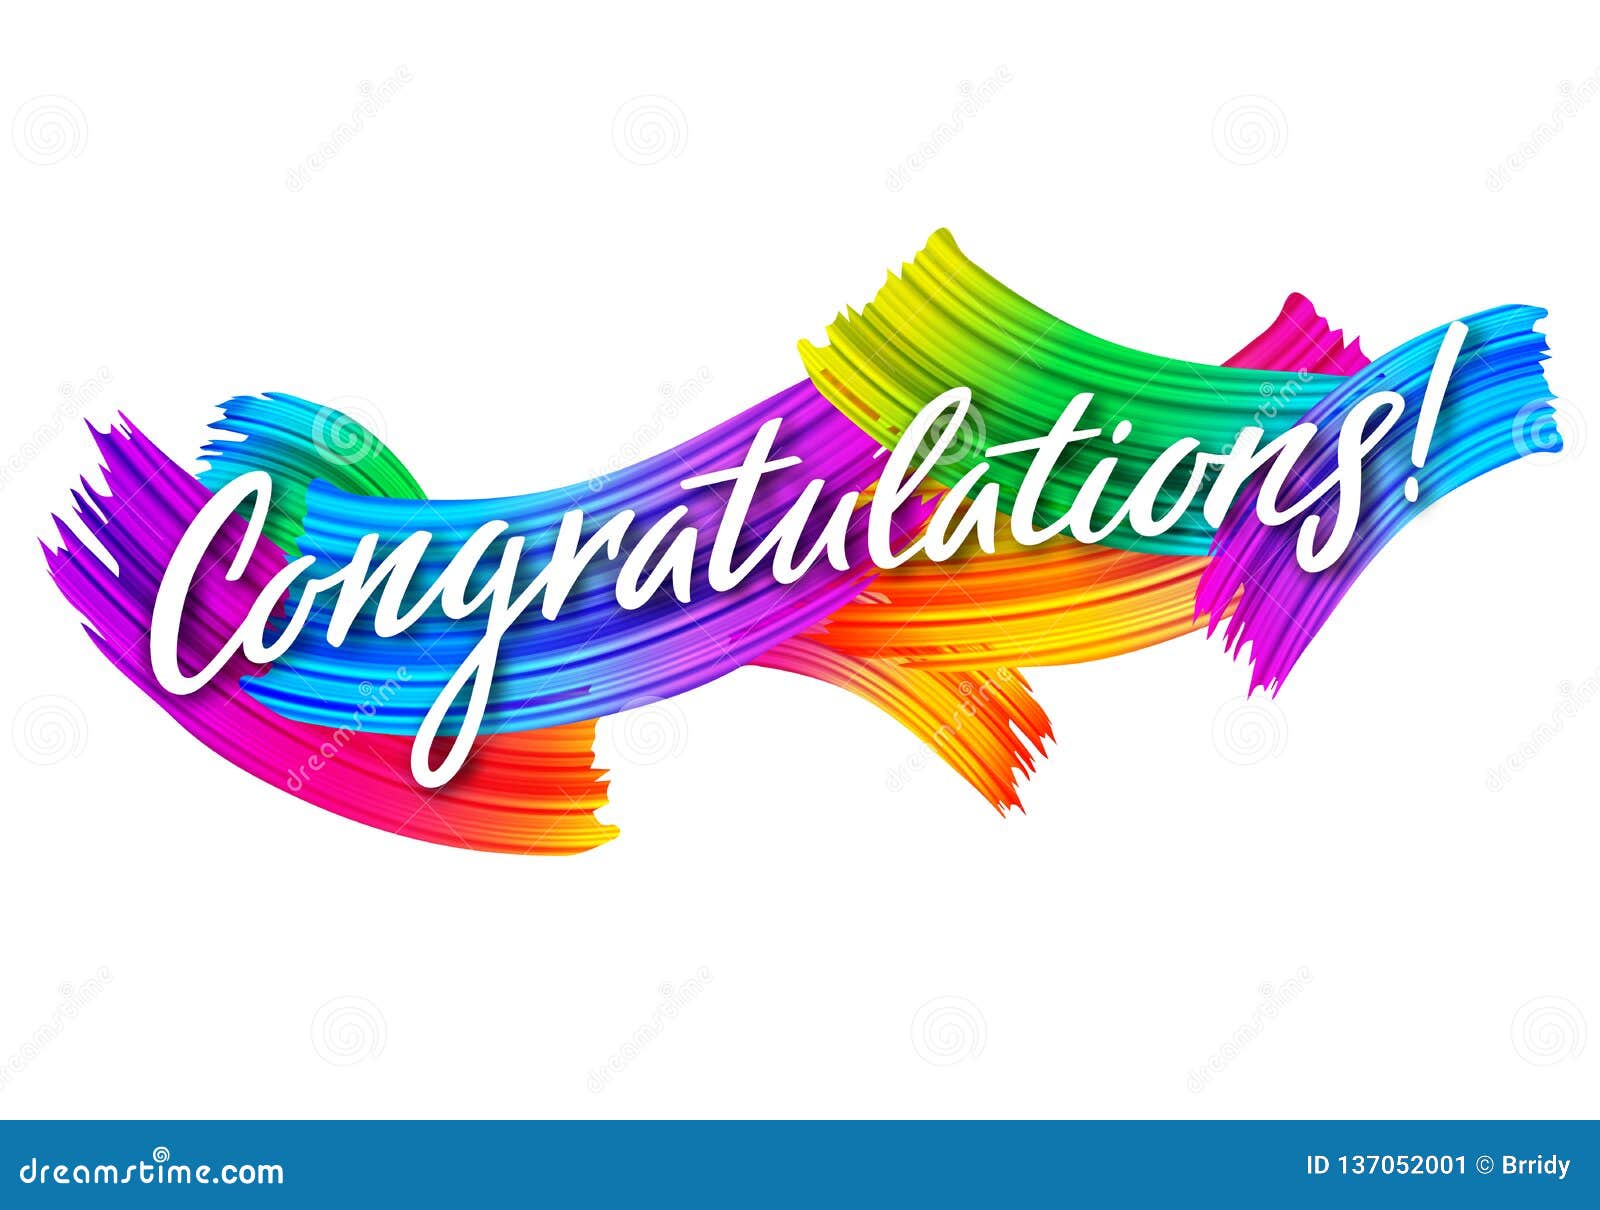 congratulations-banner-with-colorful-paint-brush-strokes-congrats-vector-card-congratulations